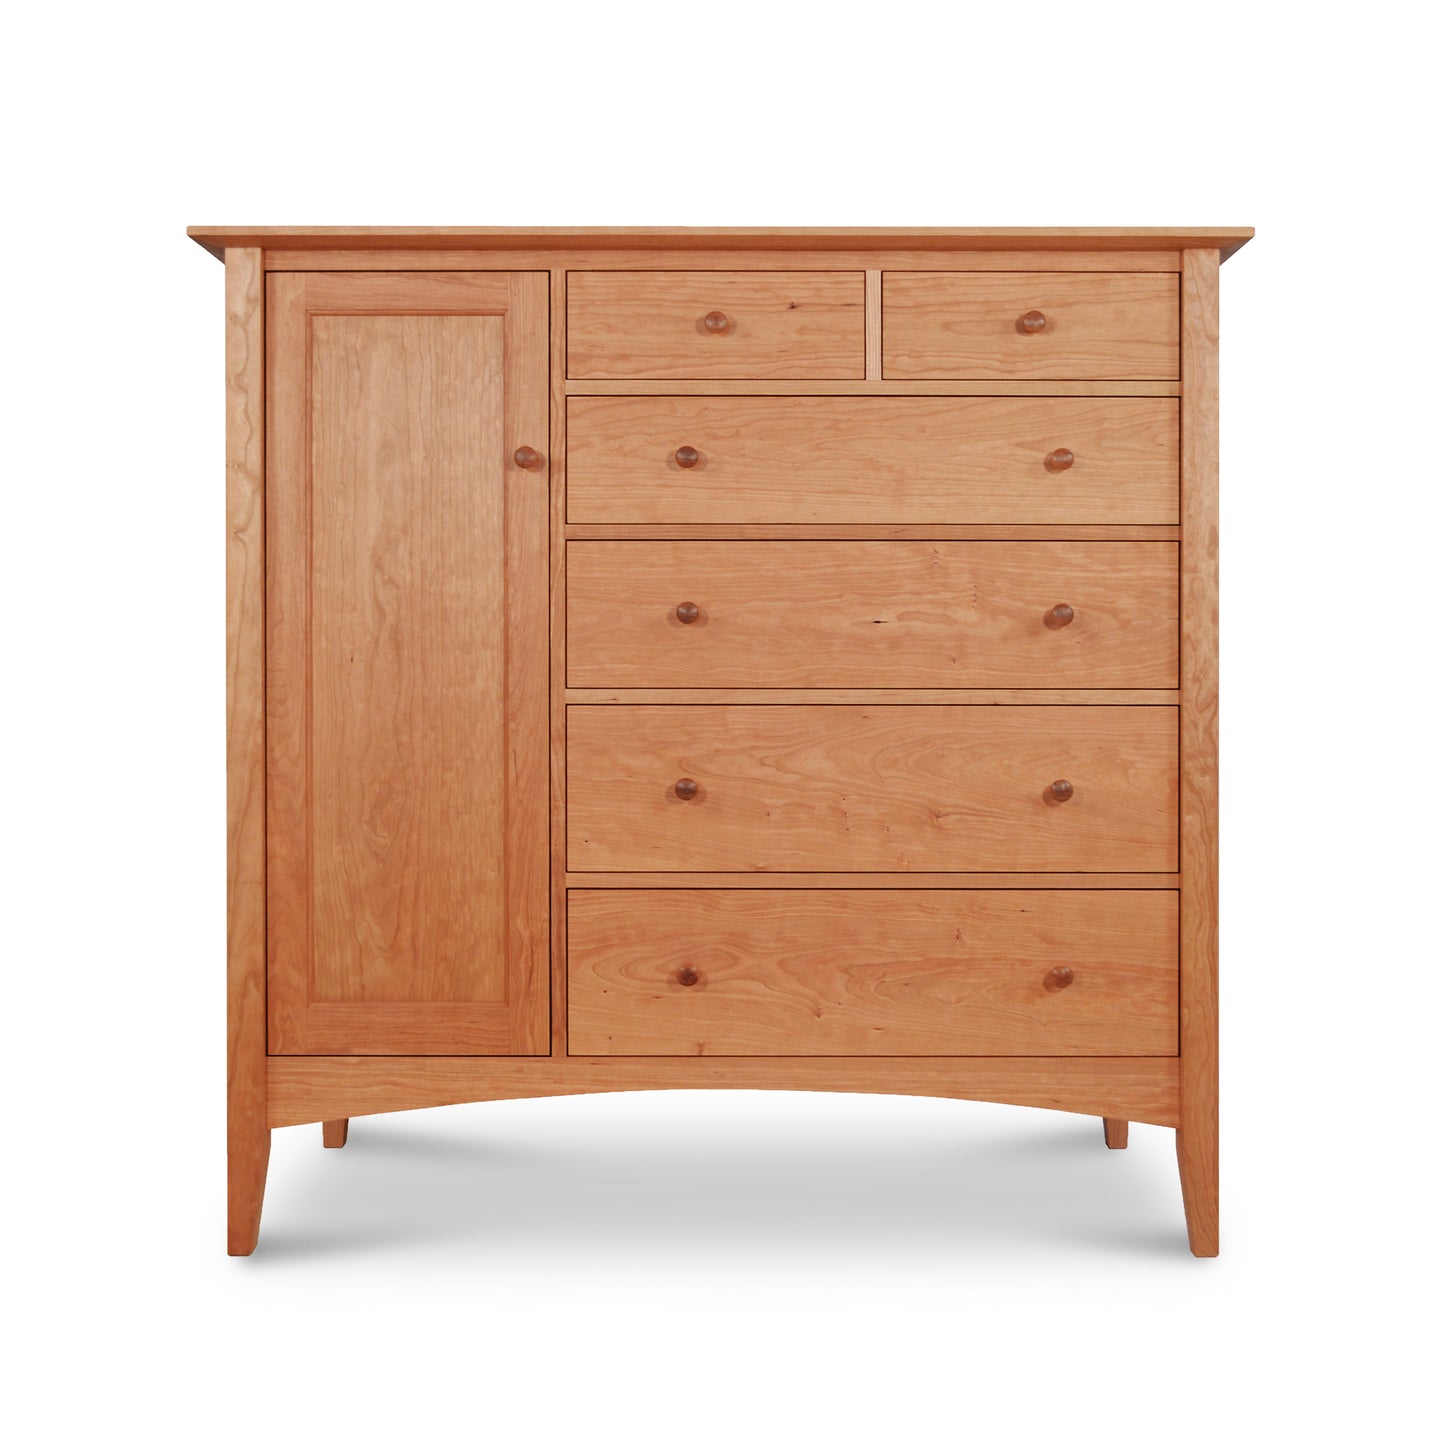 An American Shaker Gent's Chest by Maple Corner Woodworks featuring solid hardwood construction, with a combination of drawers and a single cabinet door, isolated on a white background.